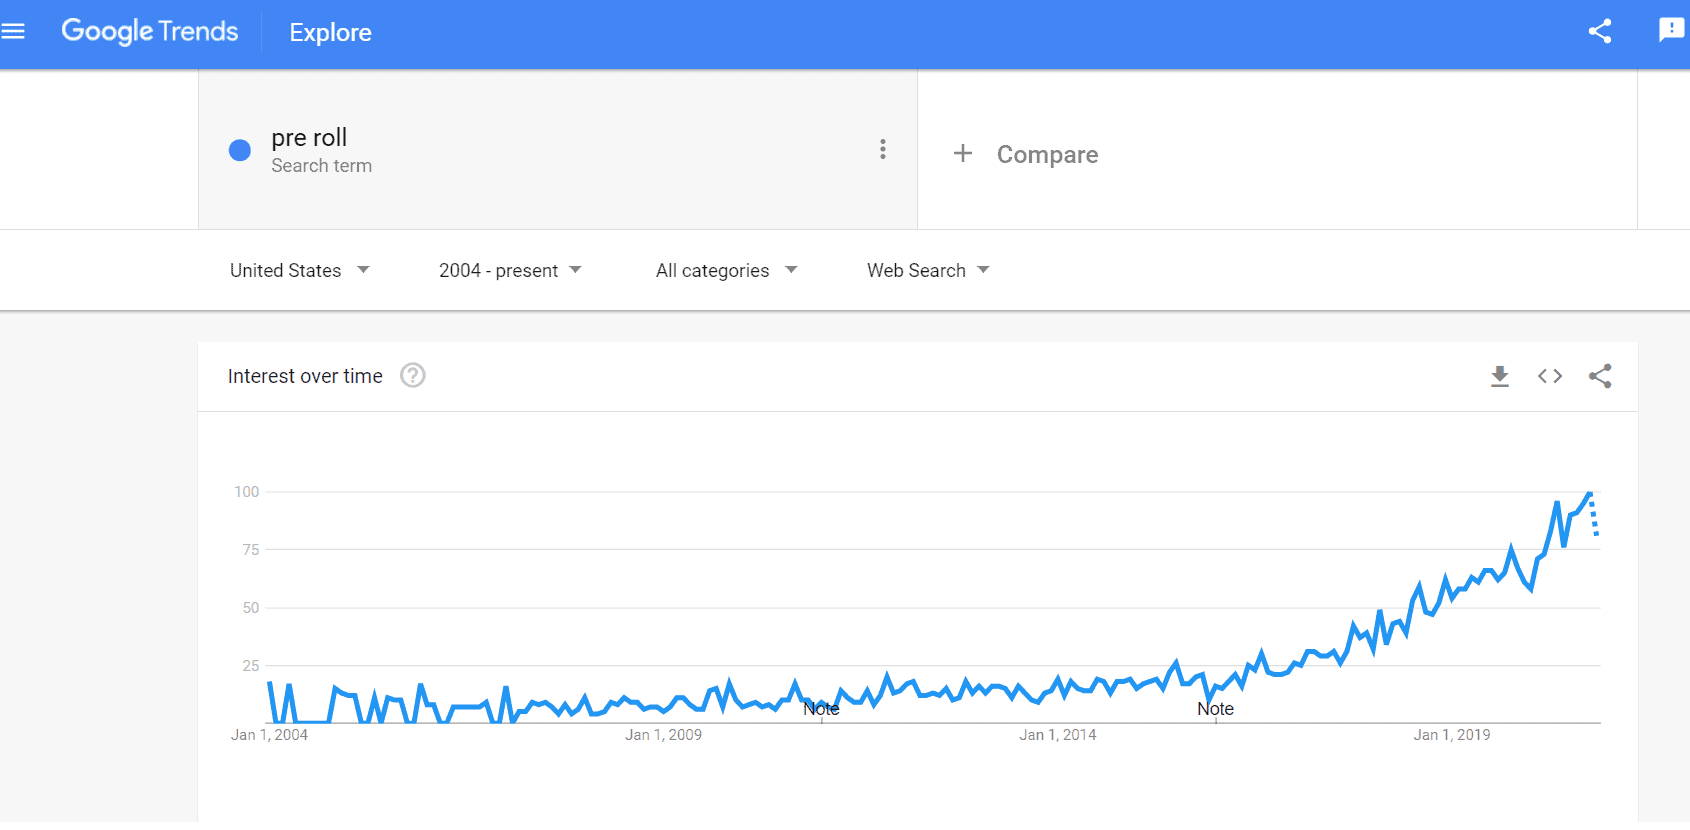 Google trend for Pre roll in last 5 years